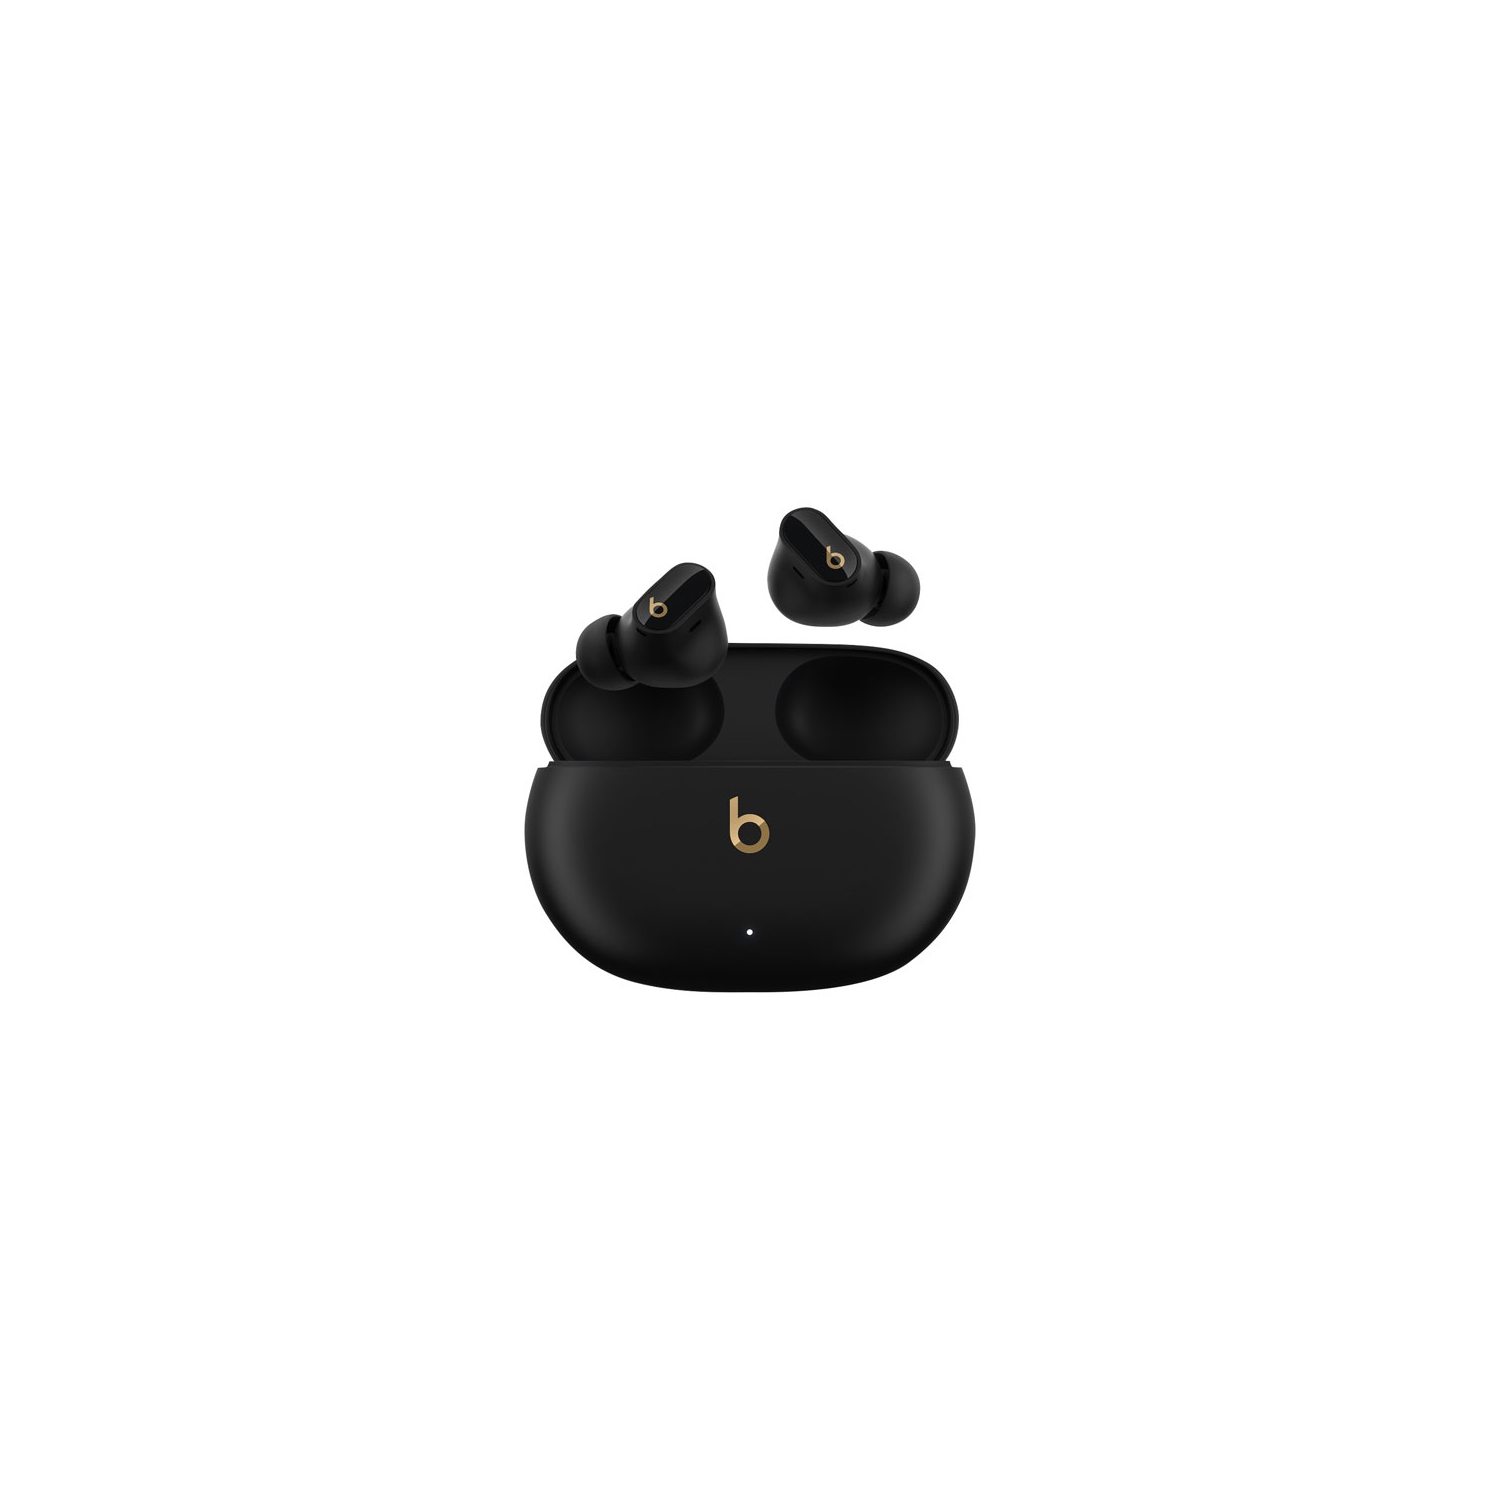 Refurbished (Excellent) -Beats By Dr. Dre Studio Buds + In-Ear Noise Cancelling Truly Wireless Headphones -Black/Gold